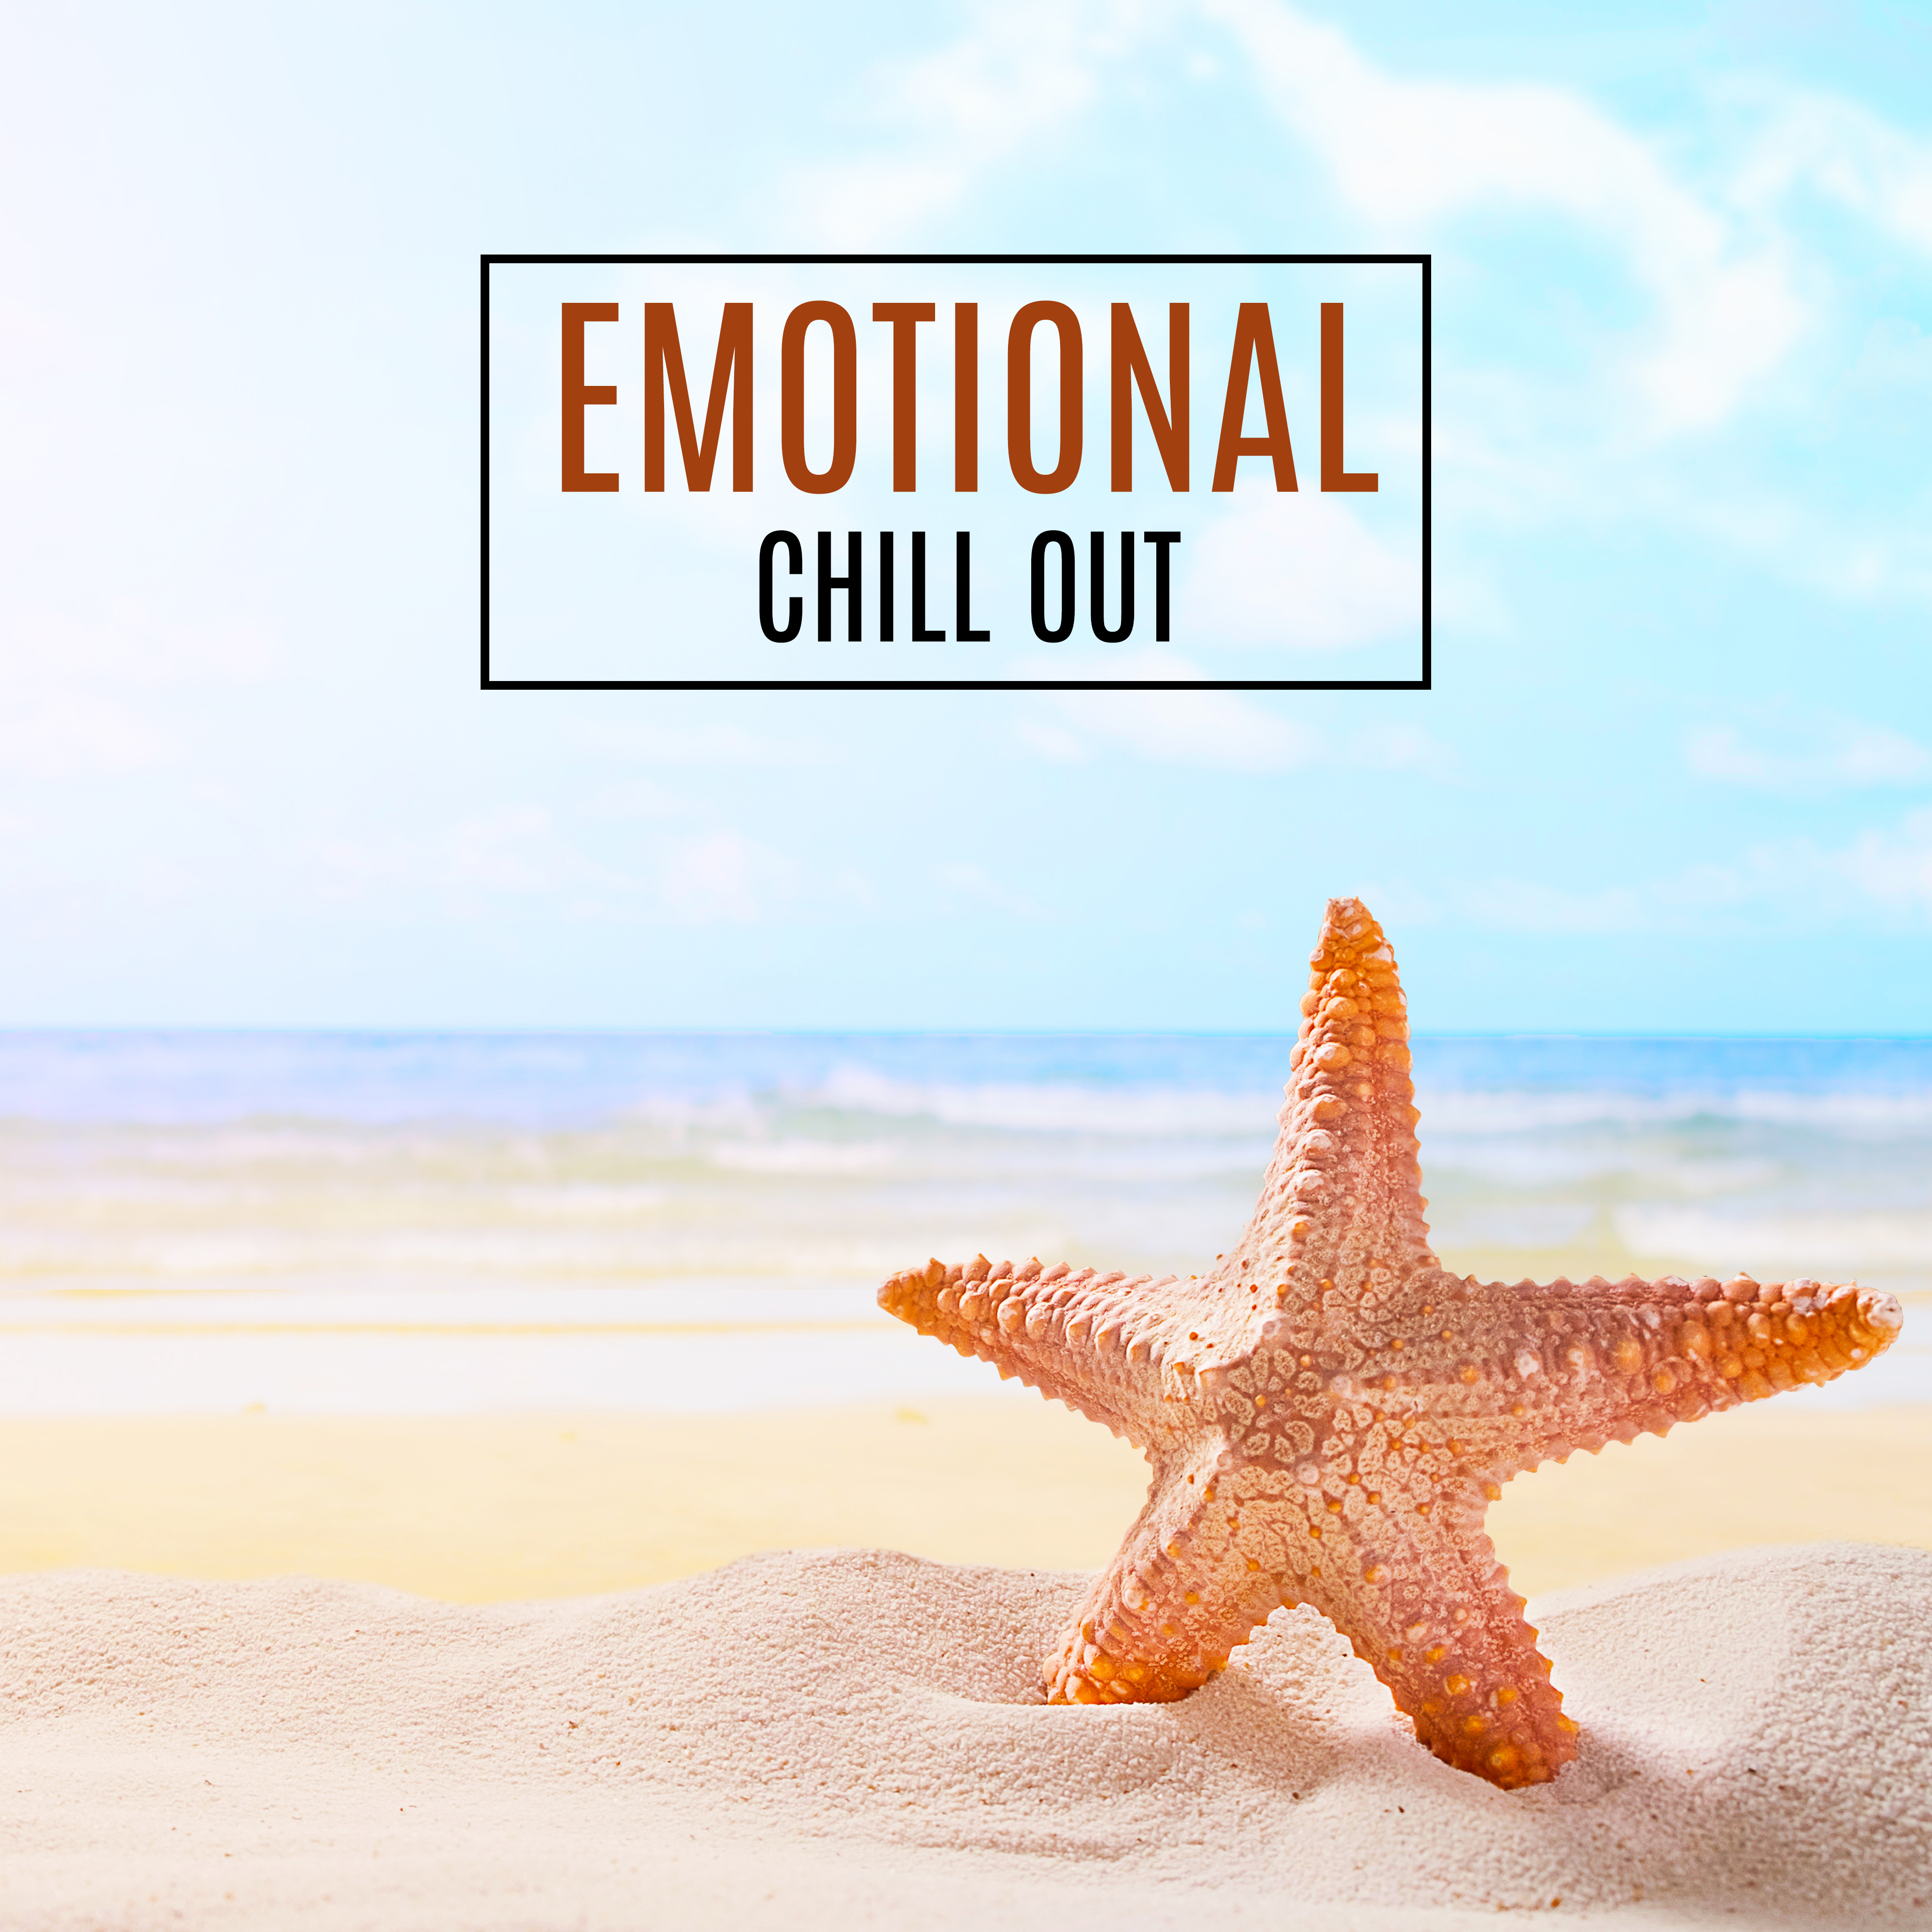 Emotional Chill Out